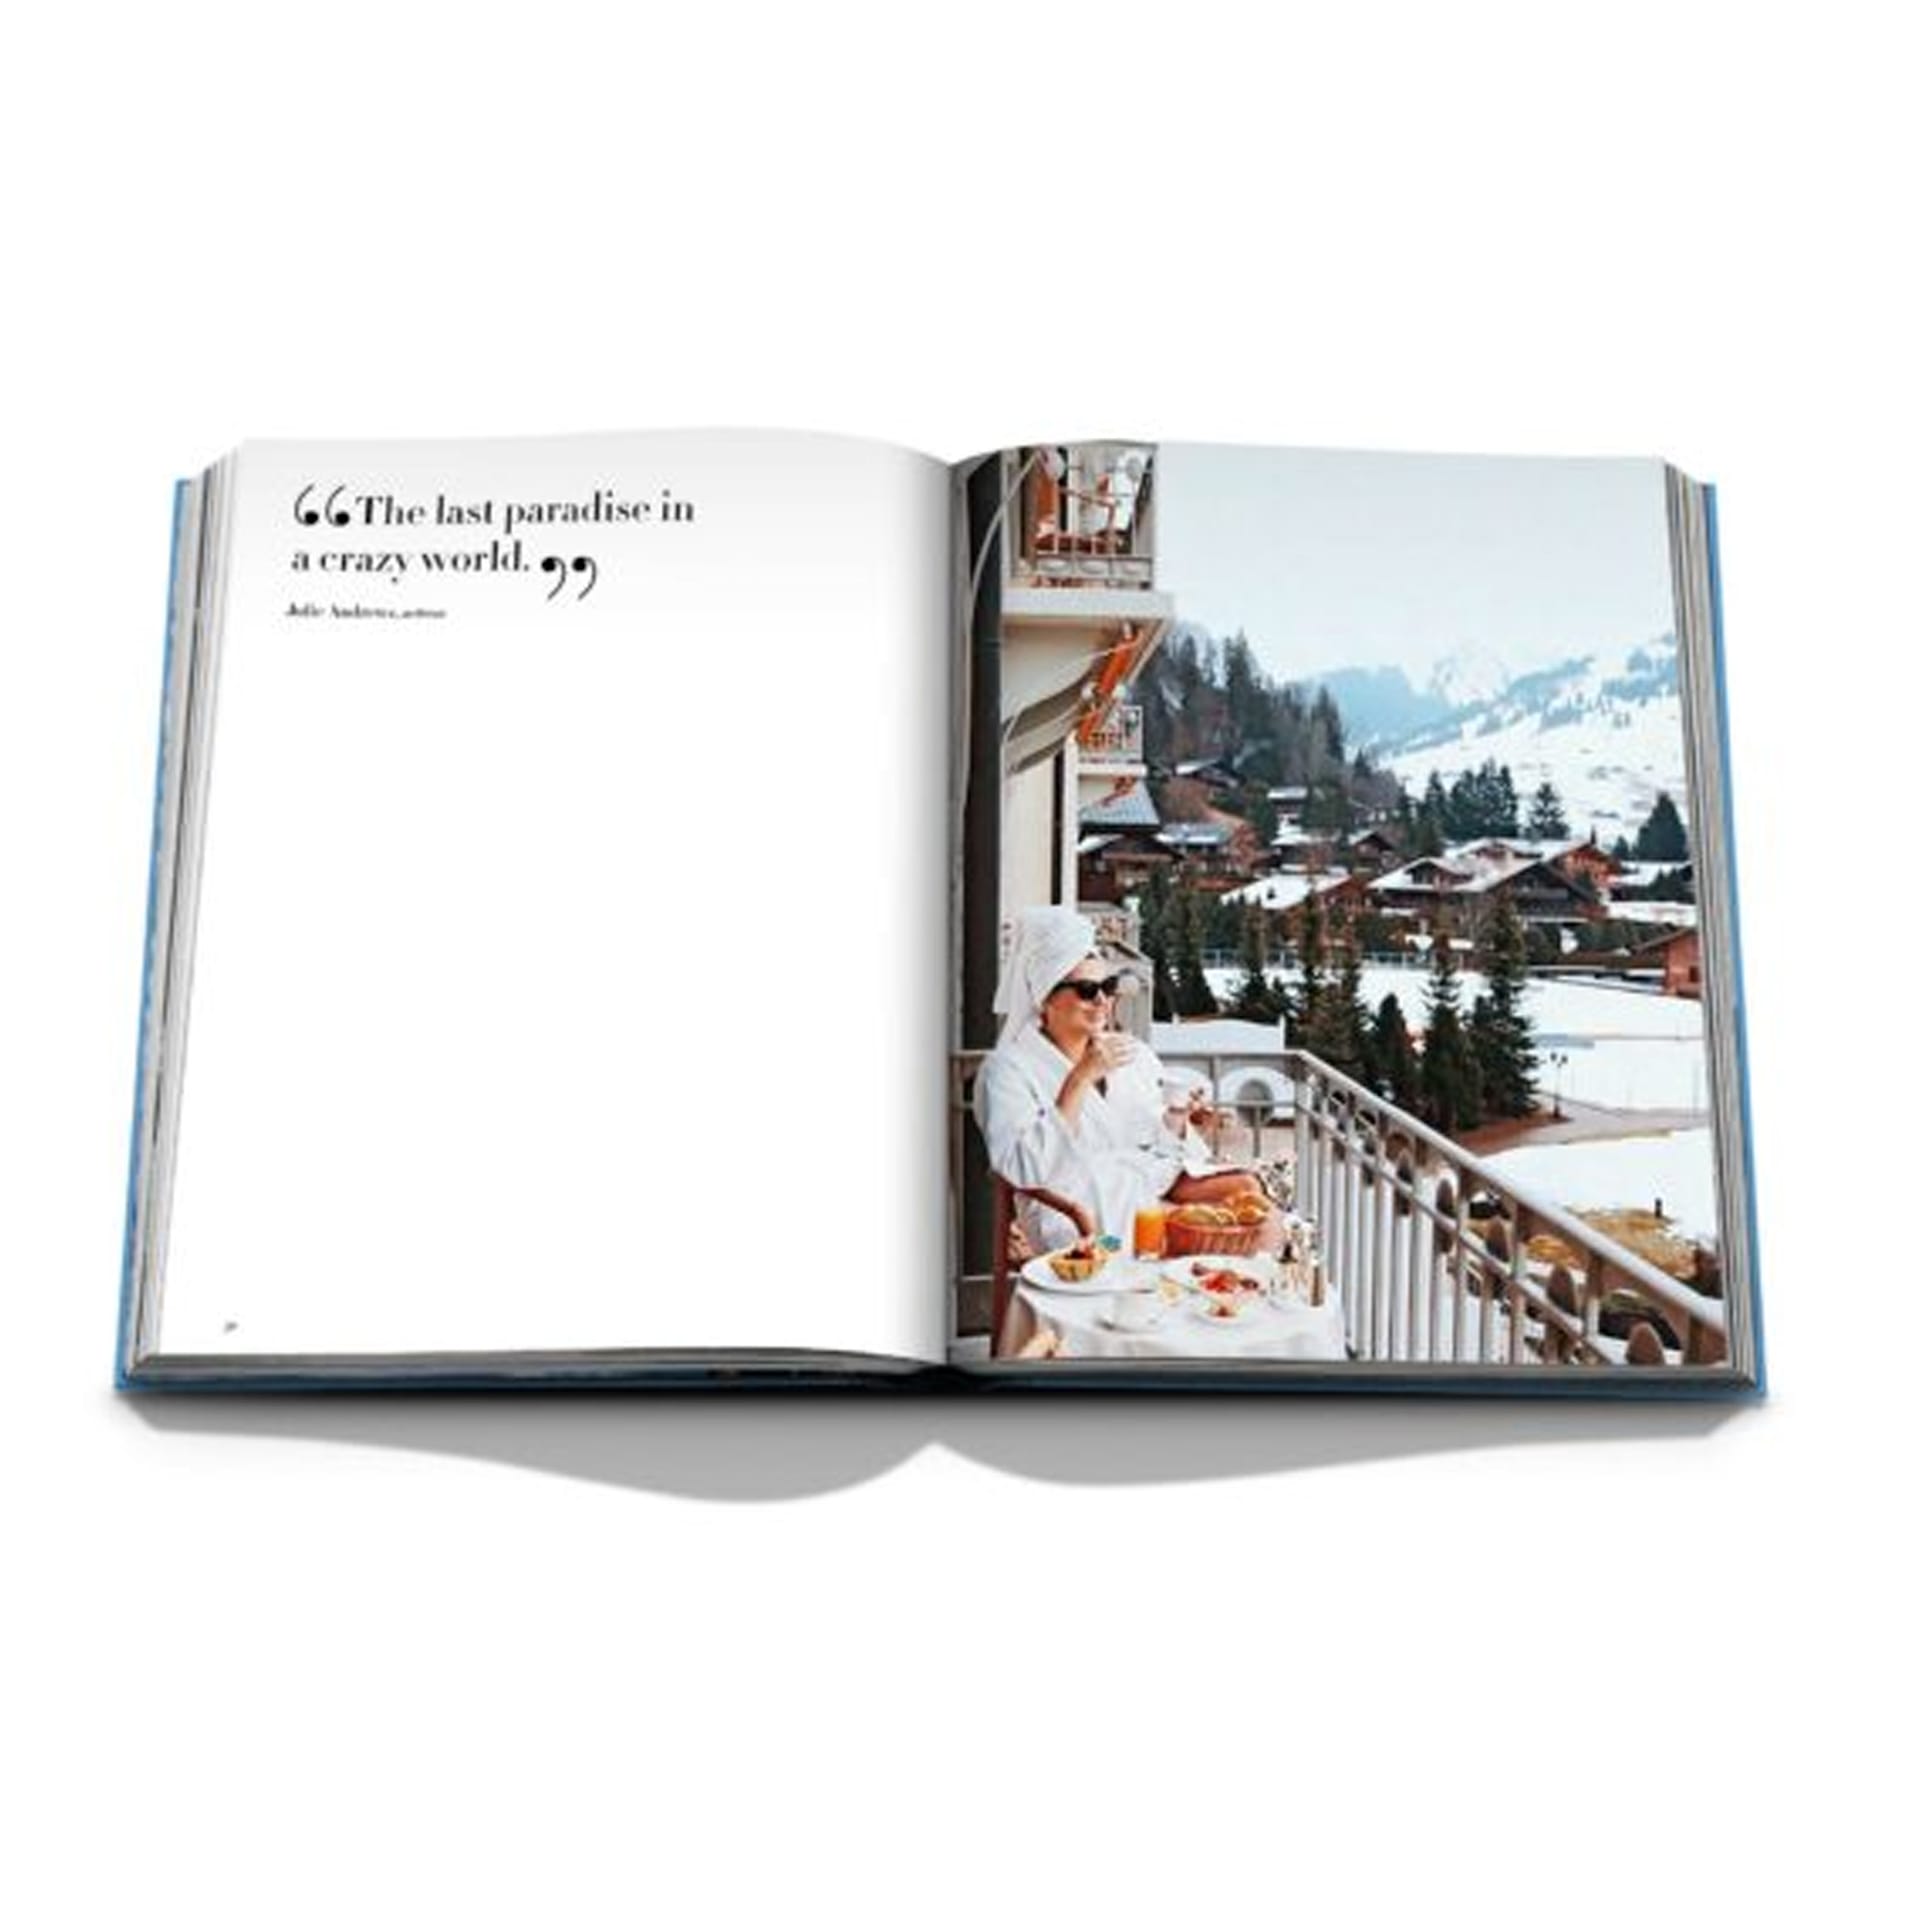 Gstaad glam - New Mags - NO GA